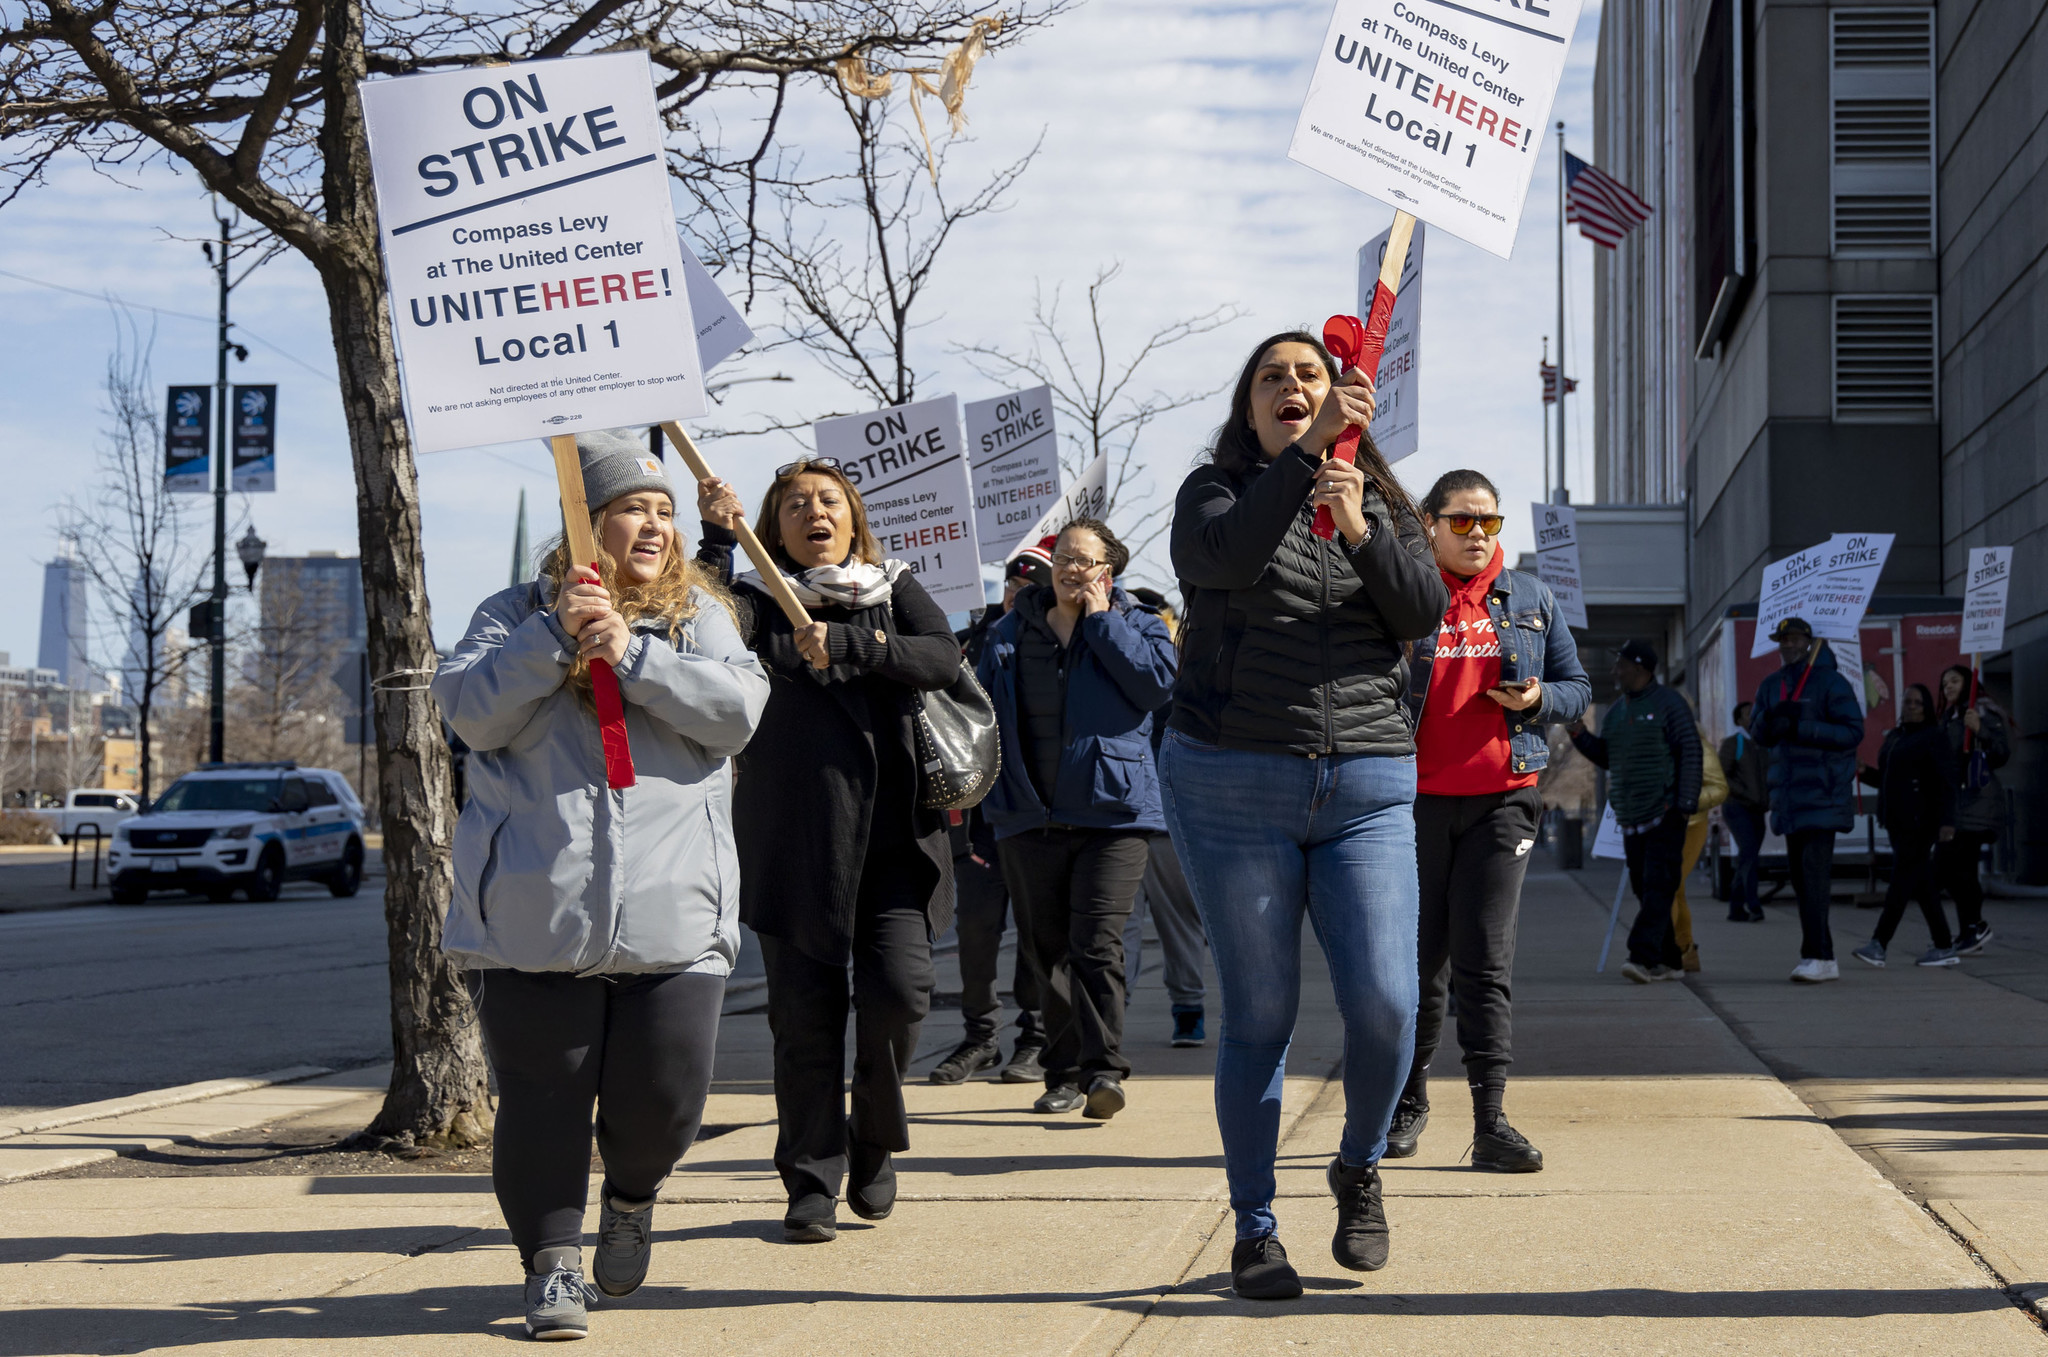 Photos: United Center workers go on strike